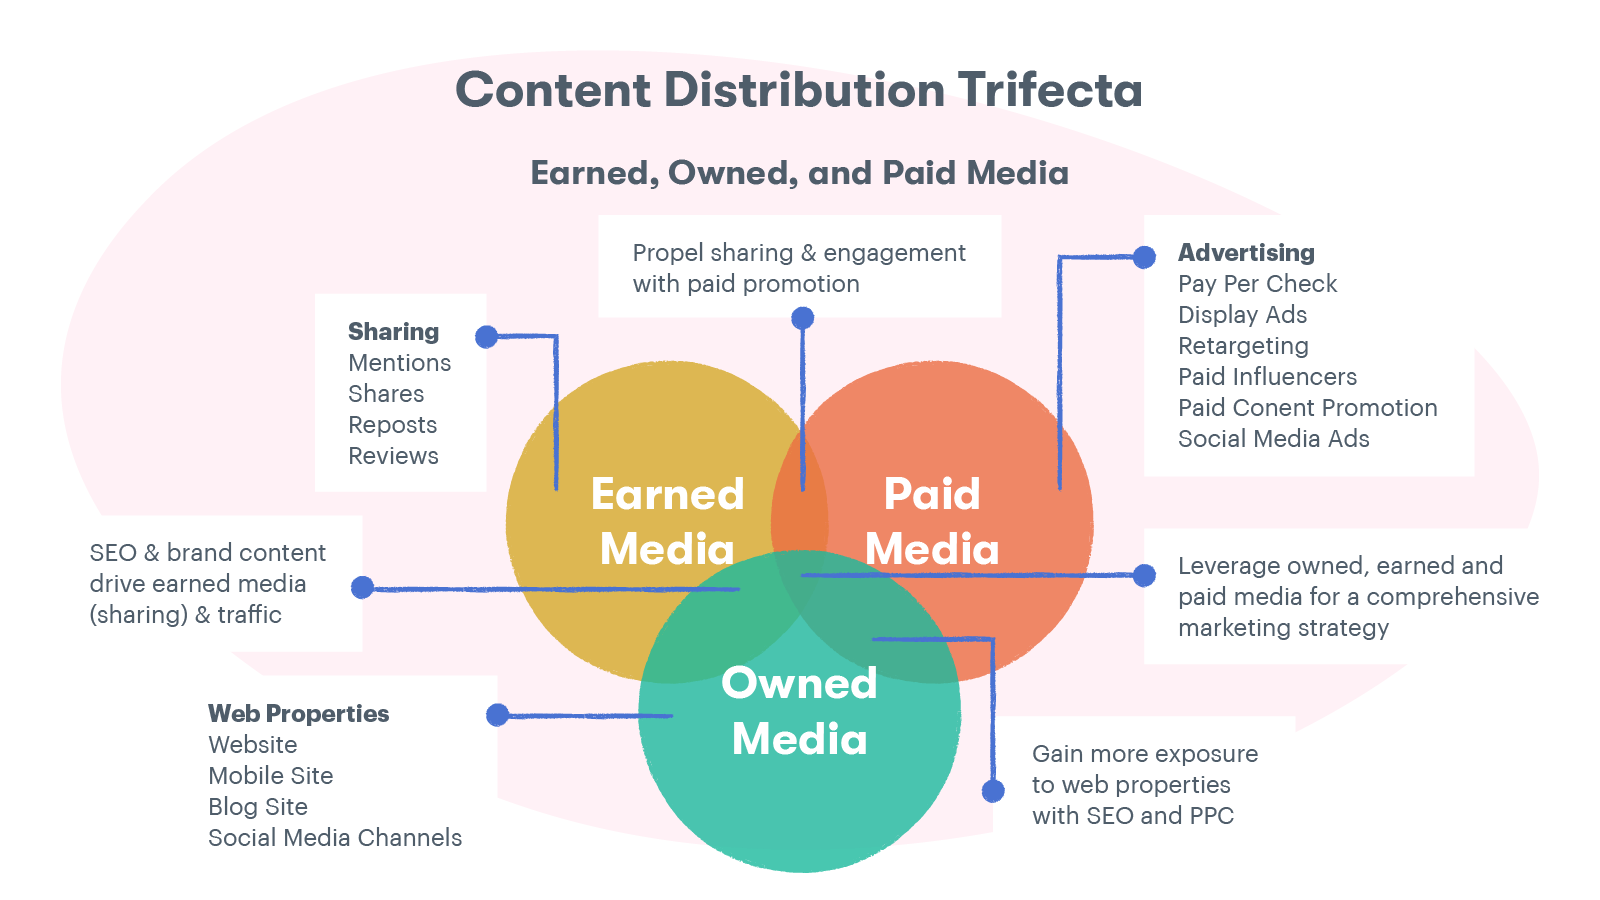 Content distribution trifecta: the difference between earned, owned, and paid media